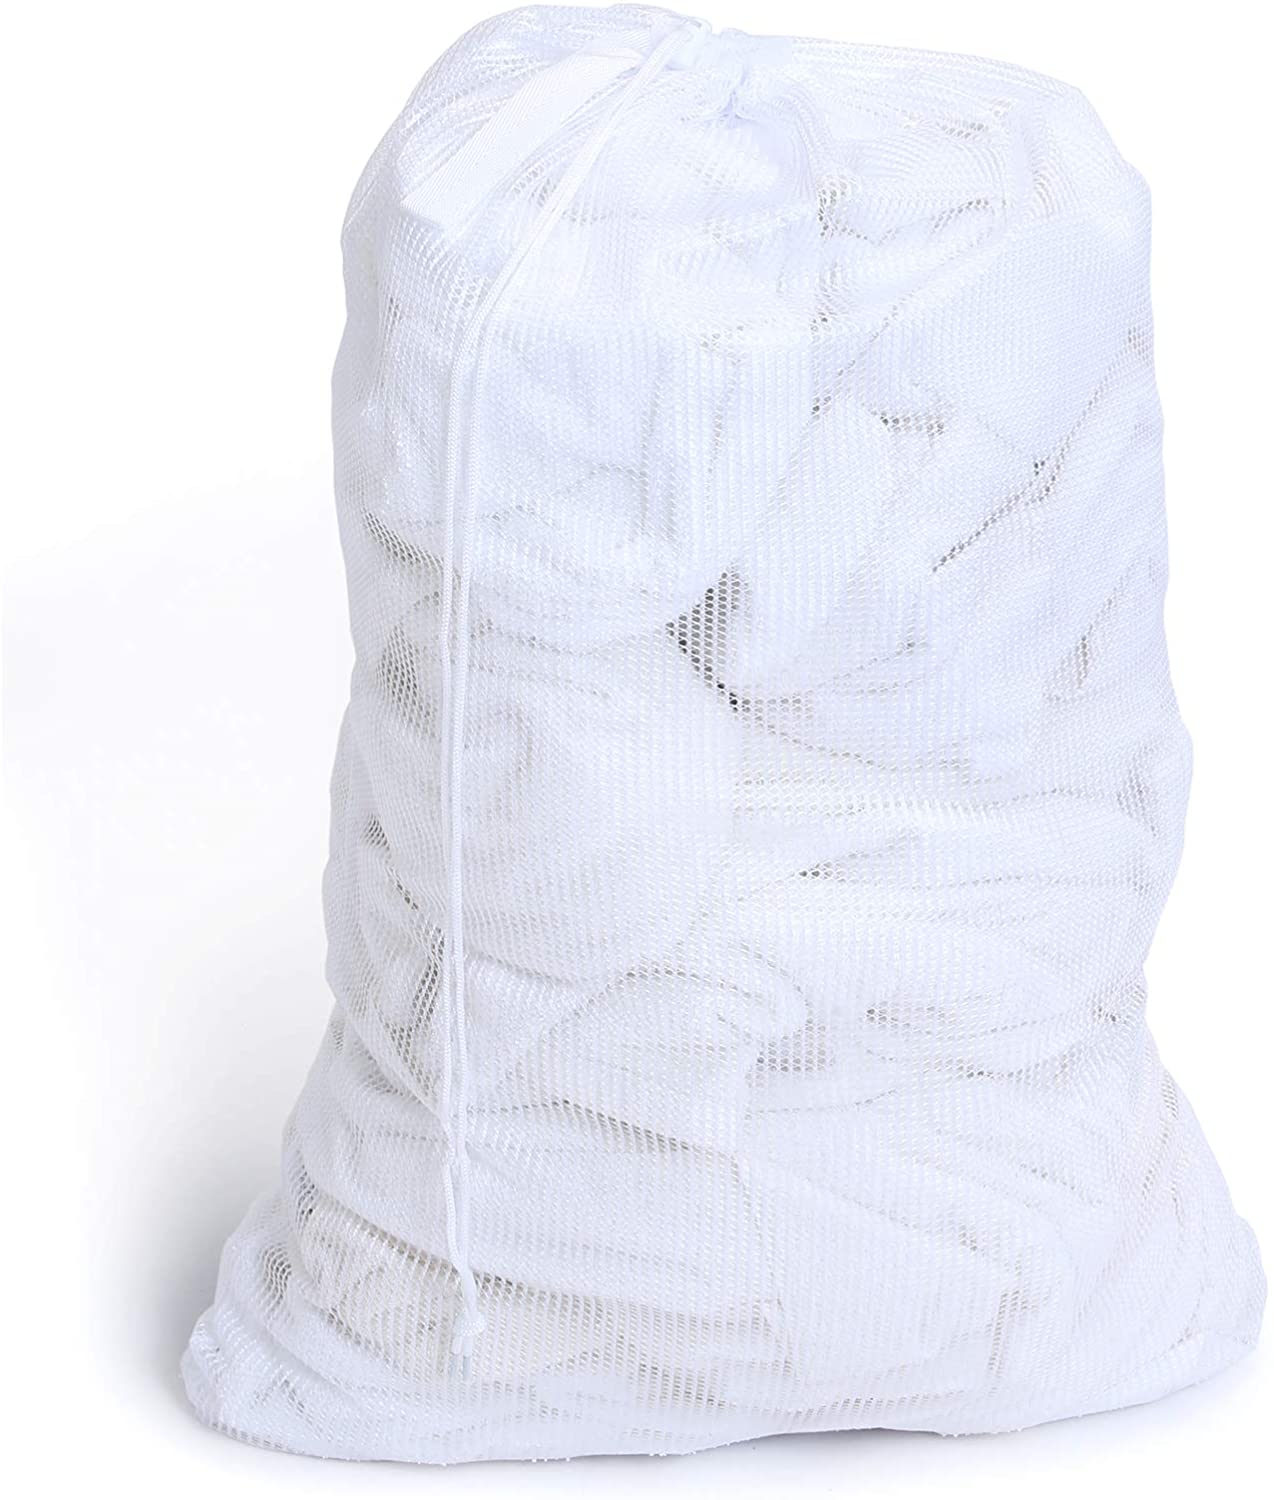 Mesh Laundry Bag with Handle and Push Lock Drawstring - Multiple Options - Smart Design® 8